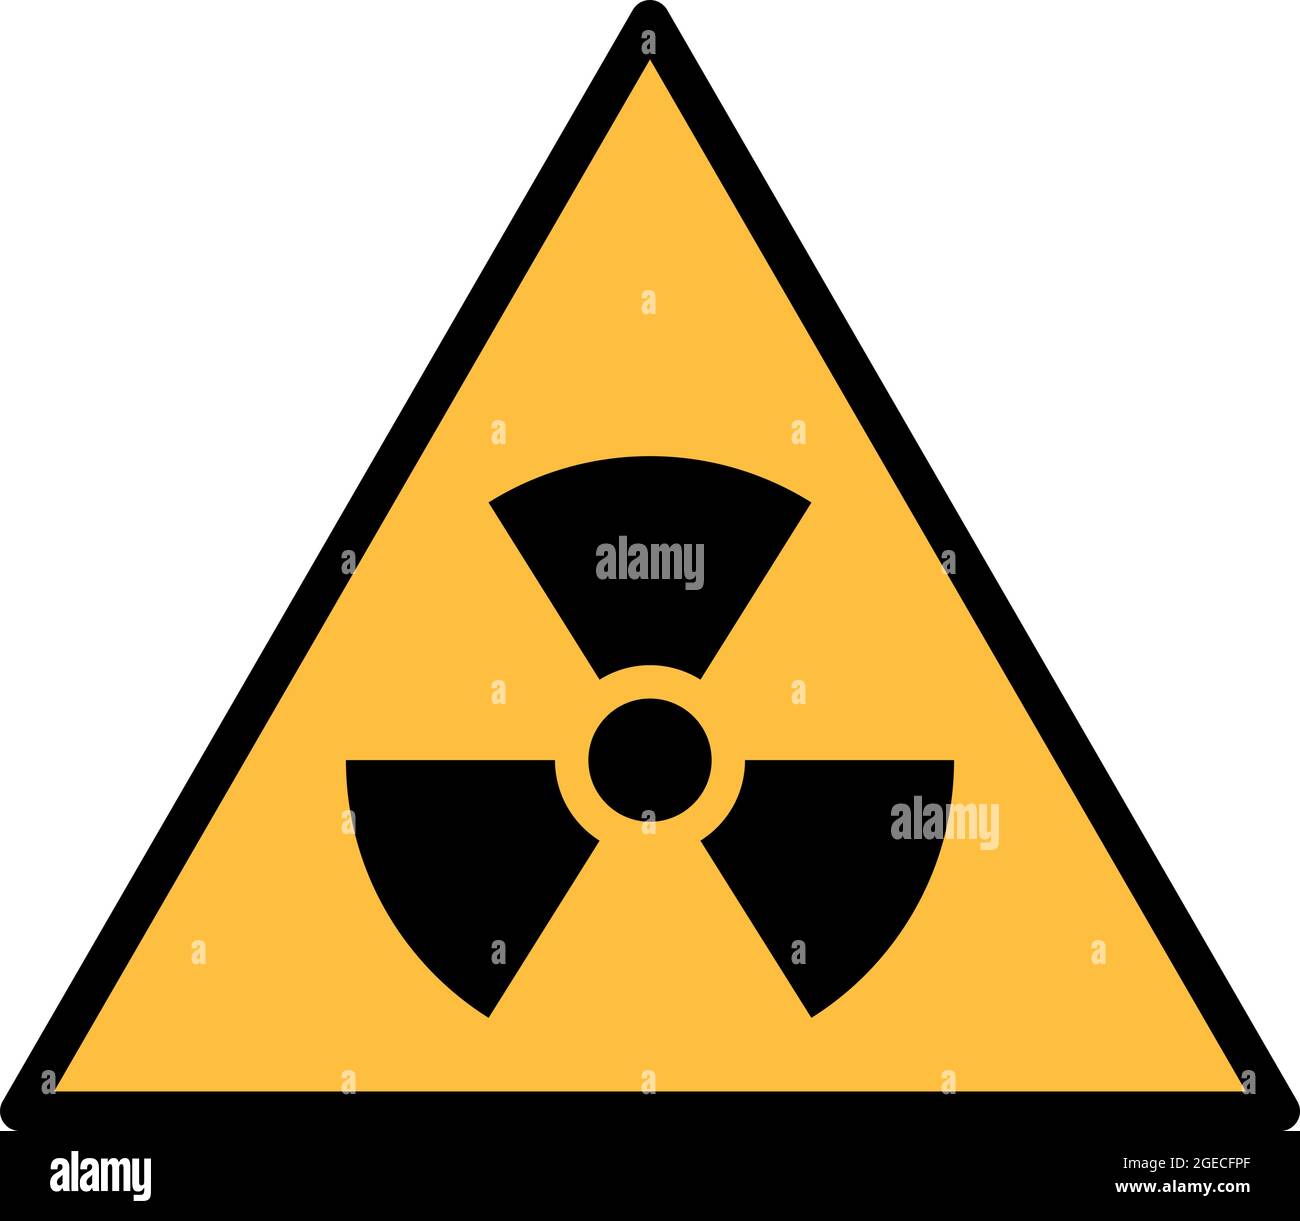 Radioactive material sign. Symbol of radiation alert, hazard or risk. Simple flat vector illustration in black and yellow. Stock Vector